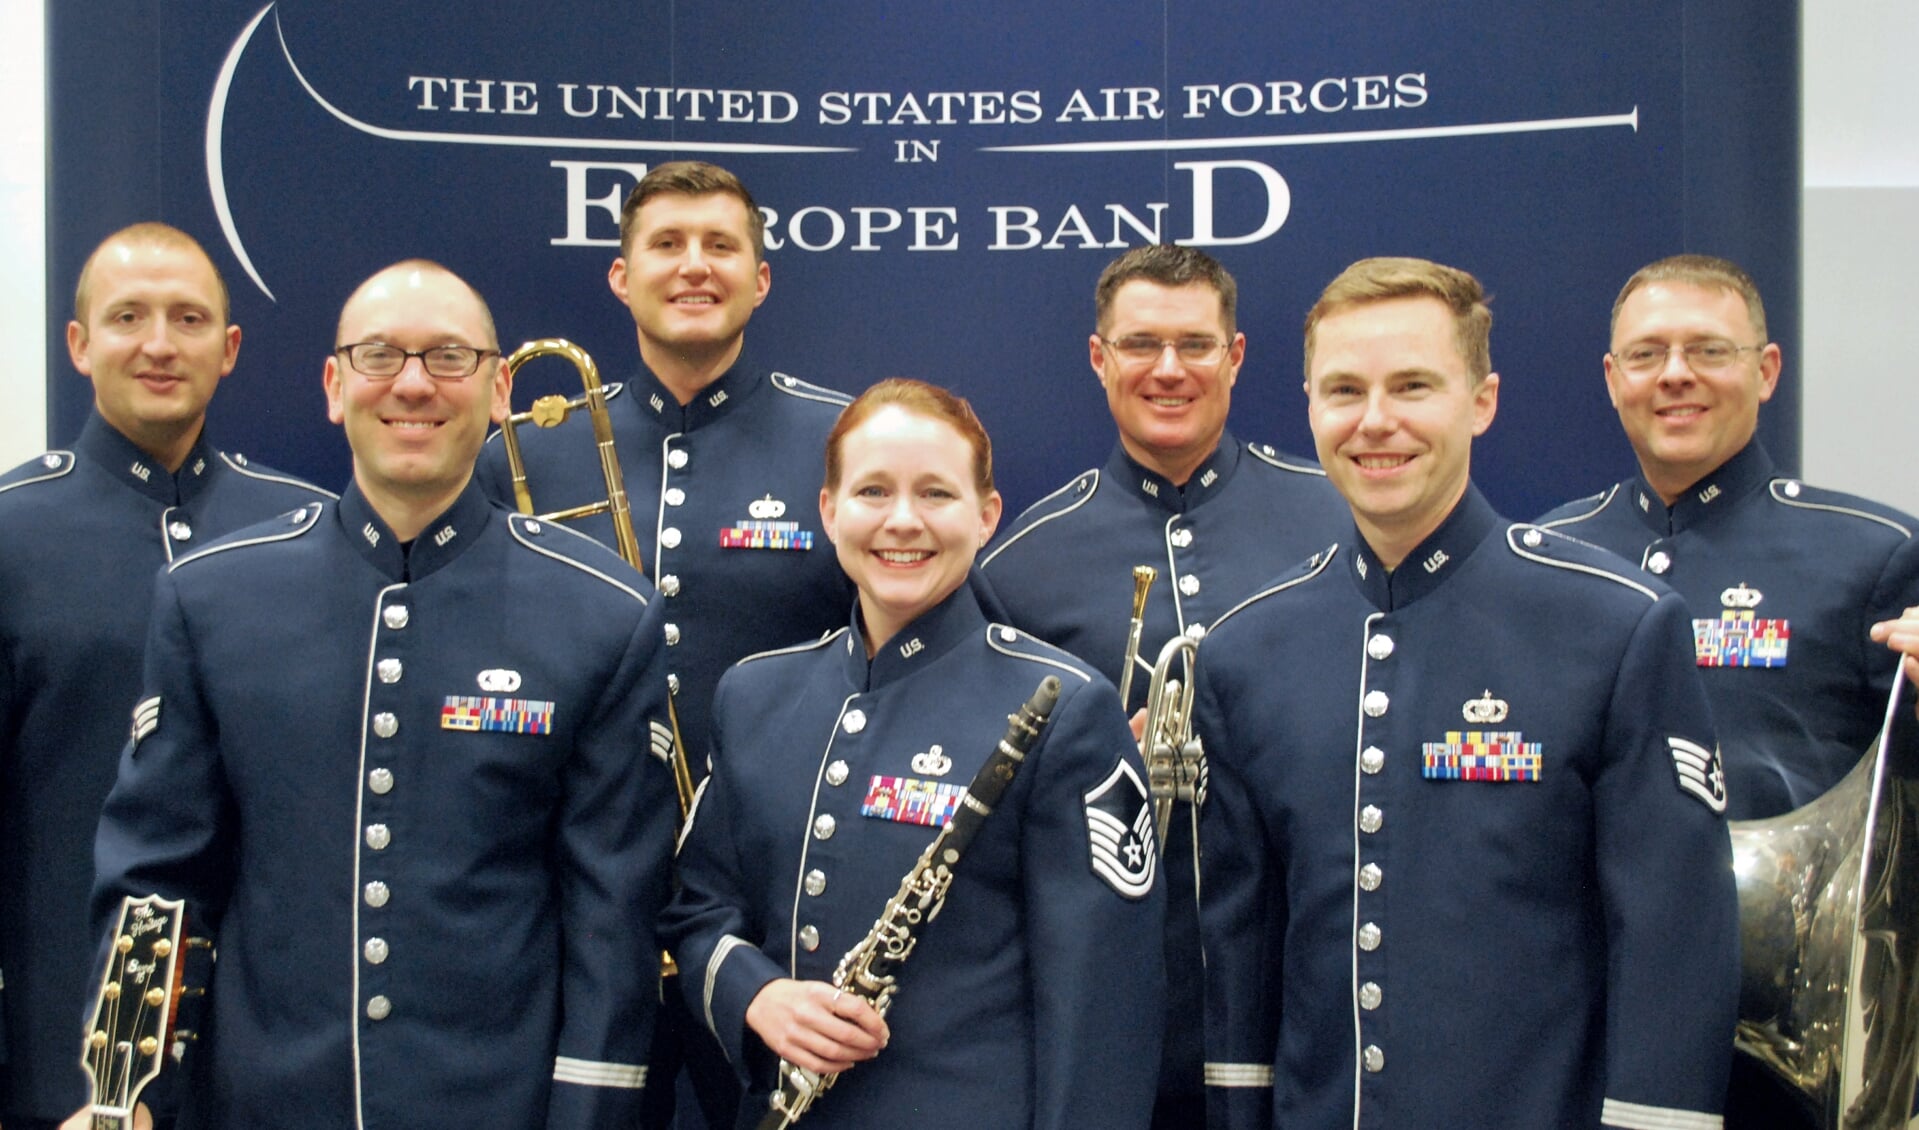 U.S. Airforce in Europe Band